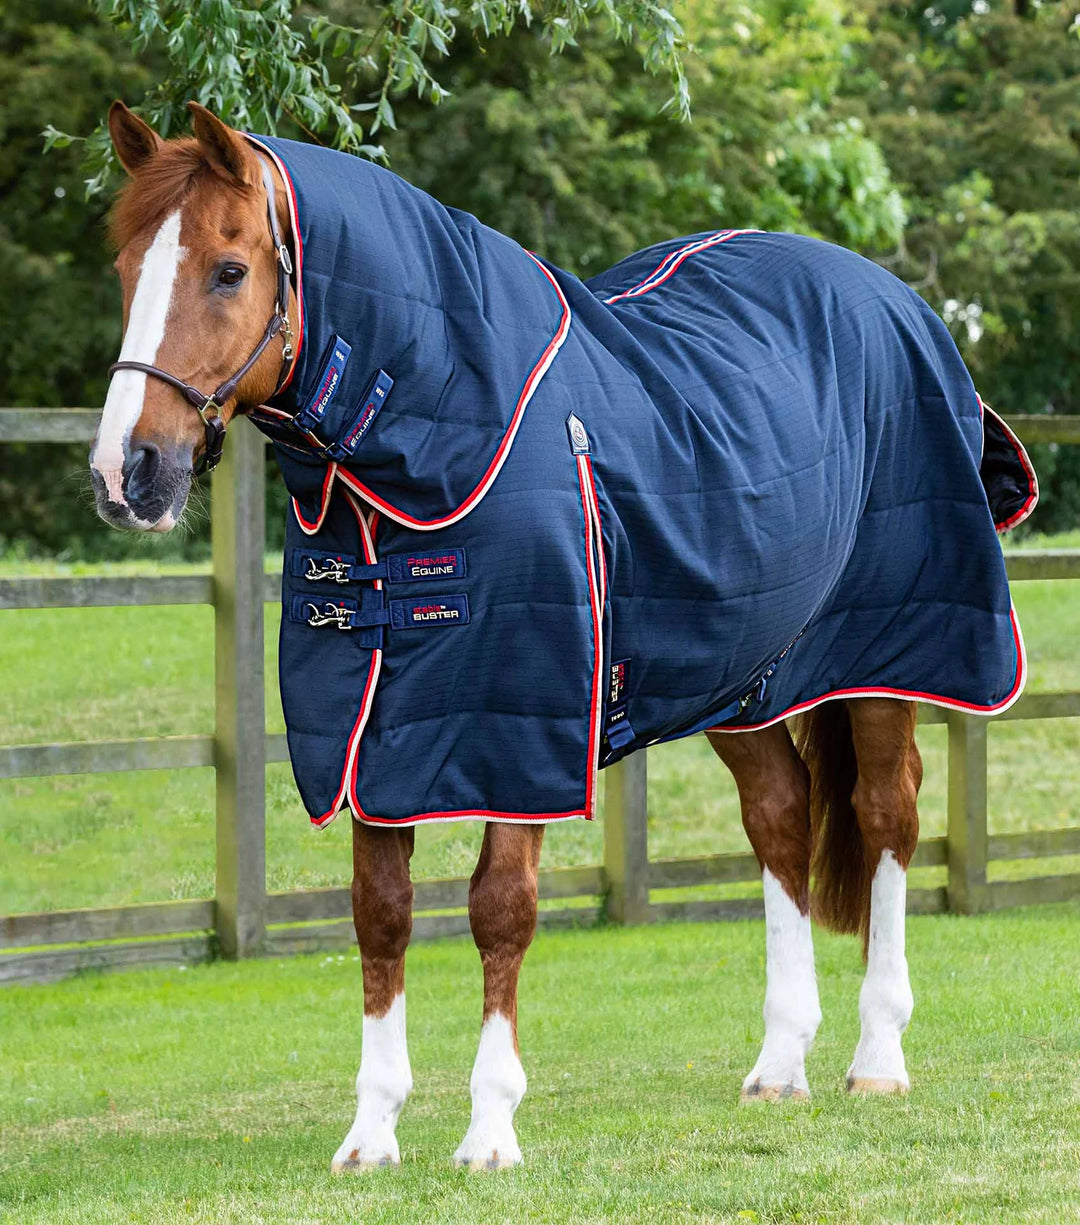 The Premier Equine Stable Buster 100g Combo in Navy#Navy